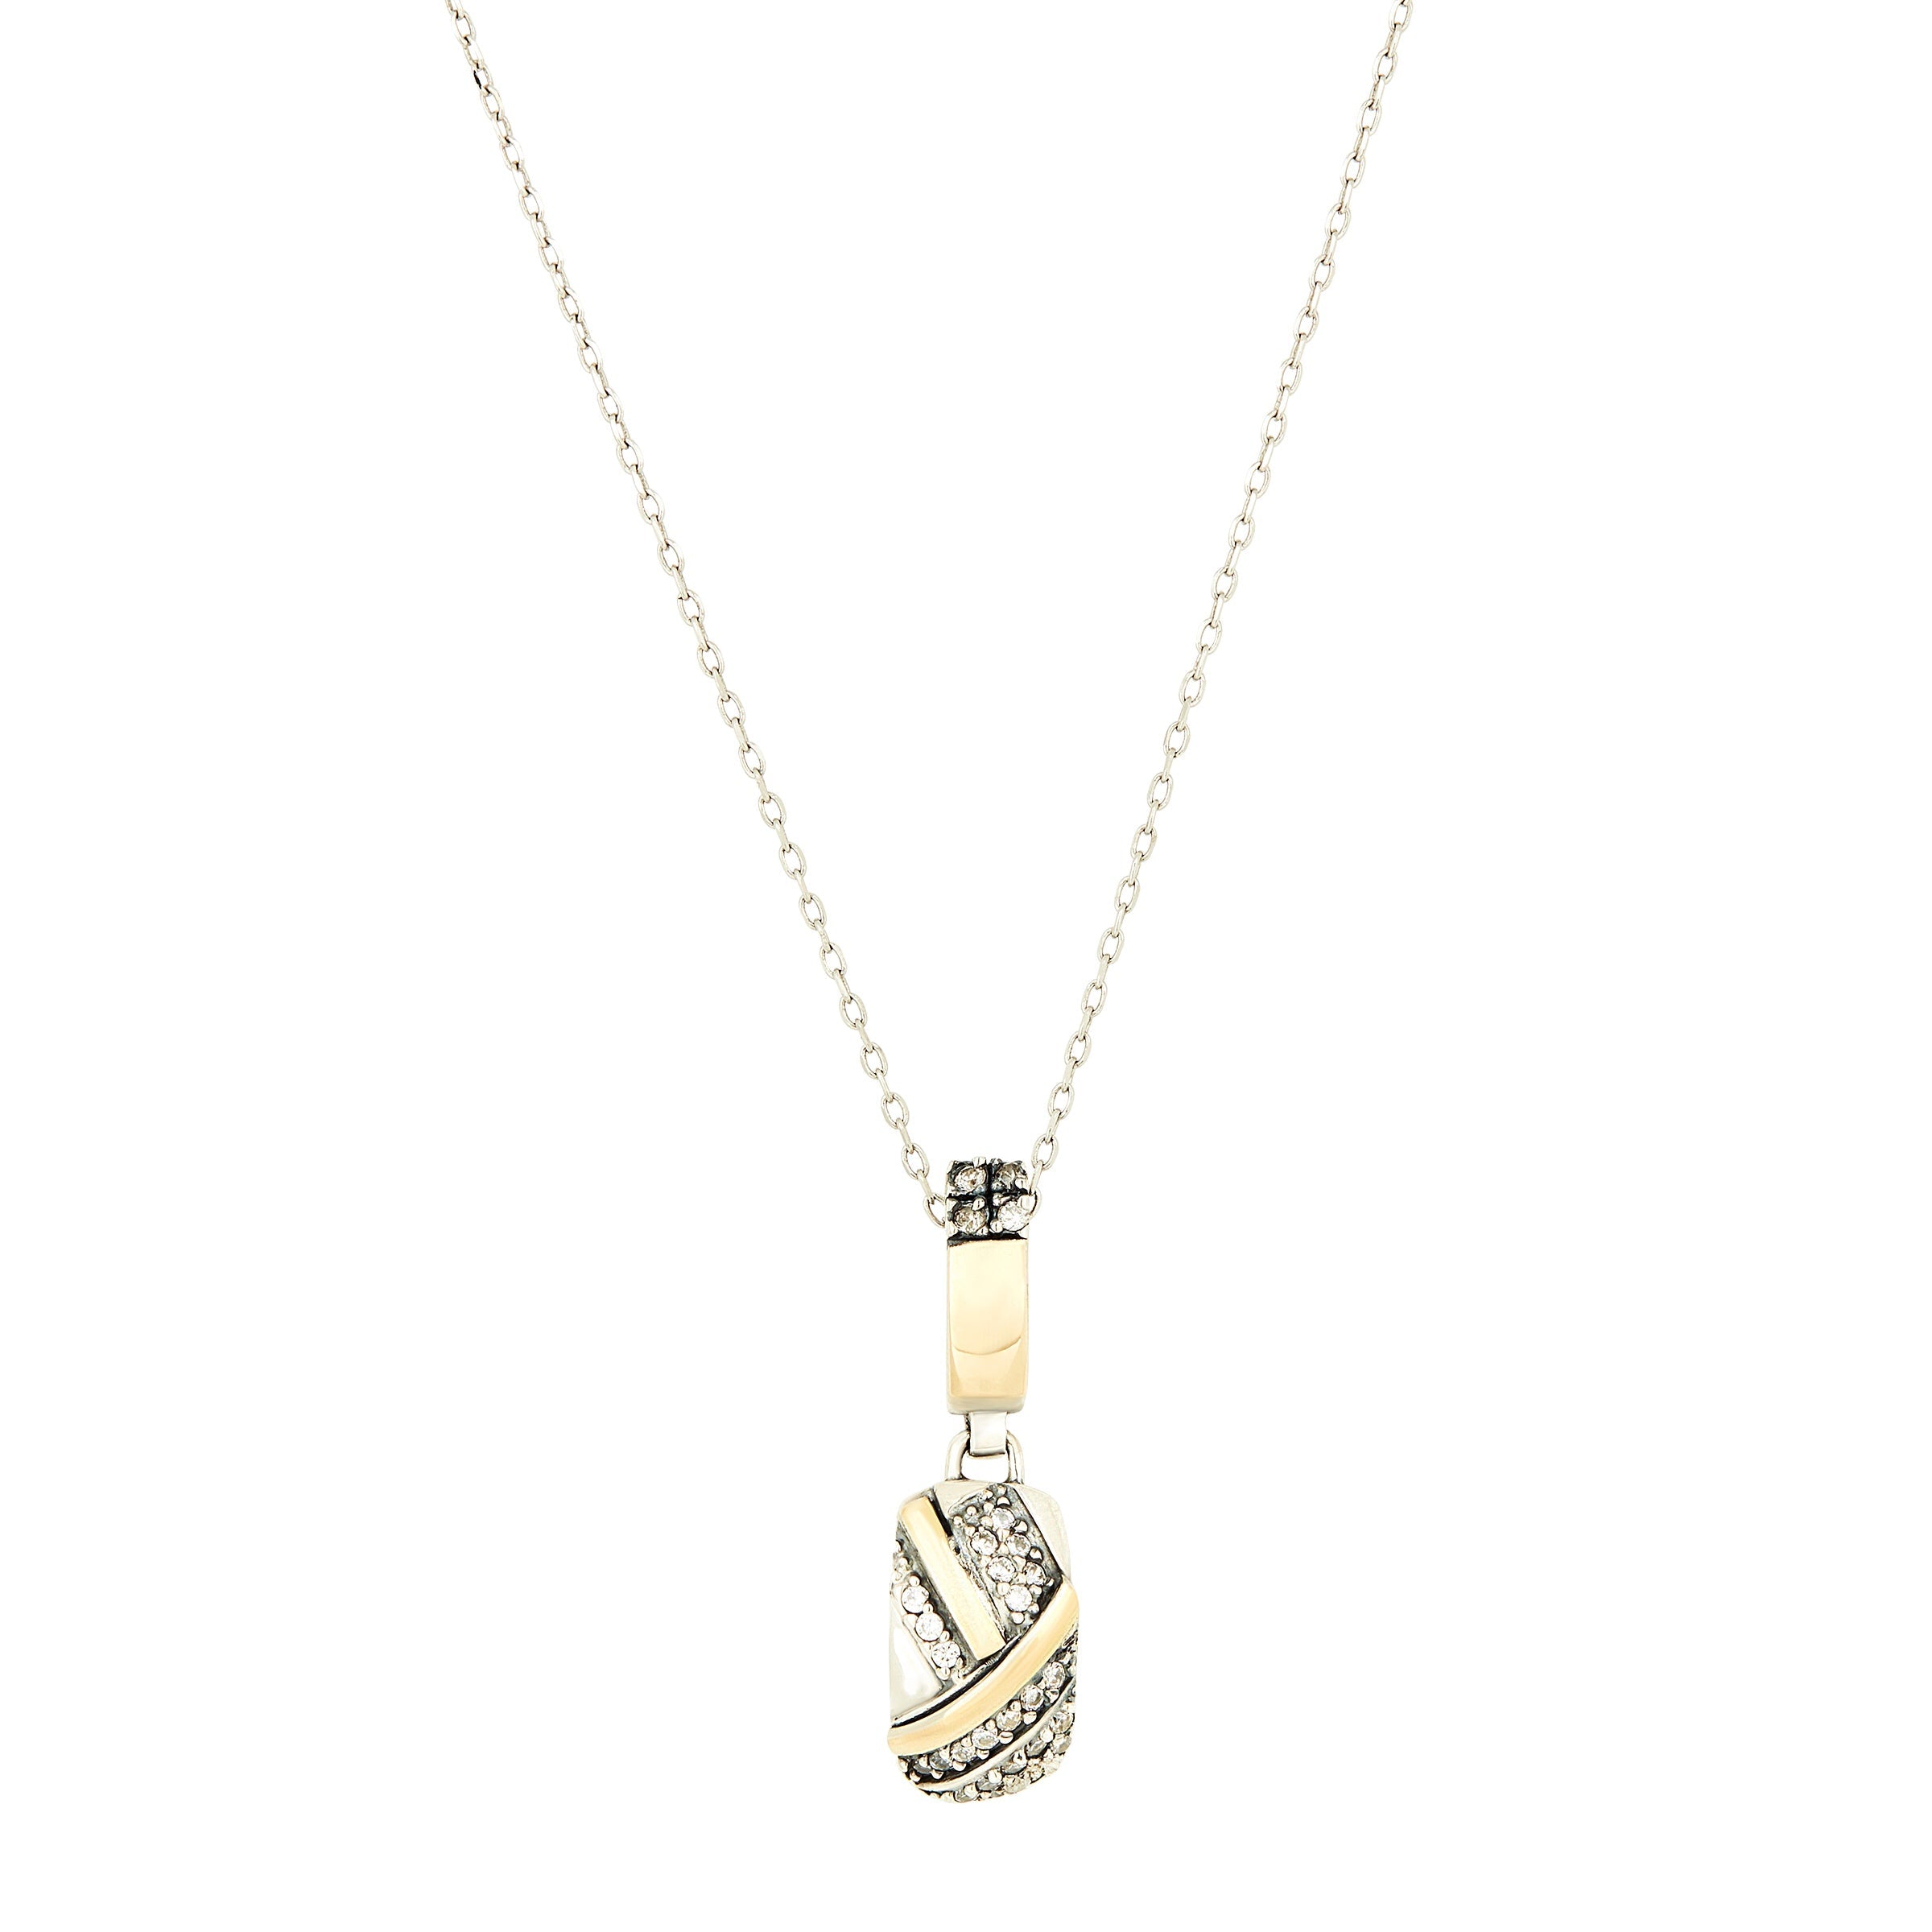 SAILOR NECKLACE - Sterling Silver & 14k Yellow Gold-Tayroni